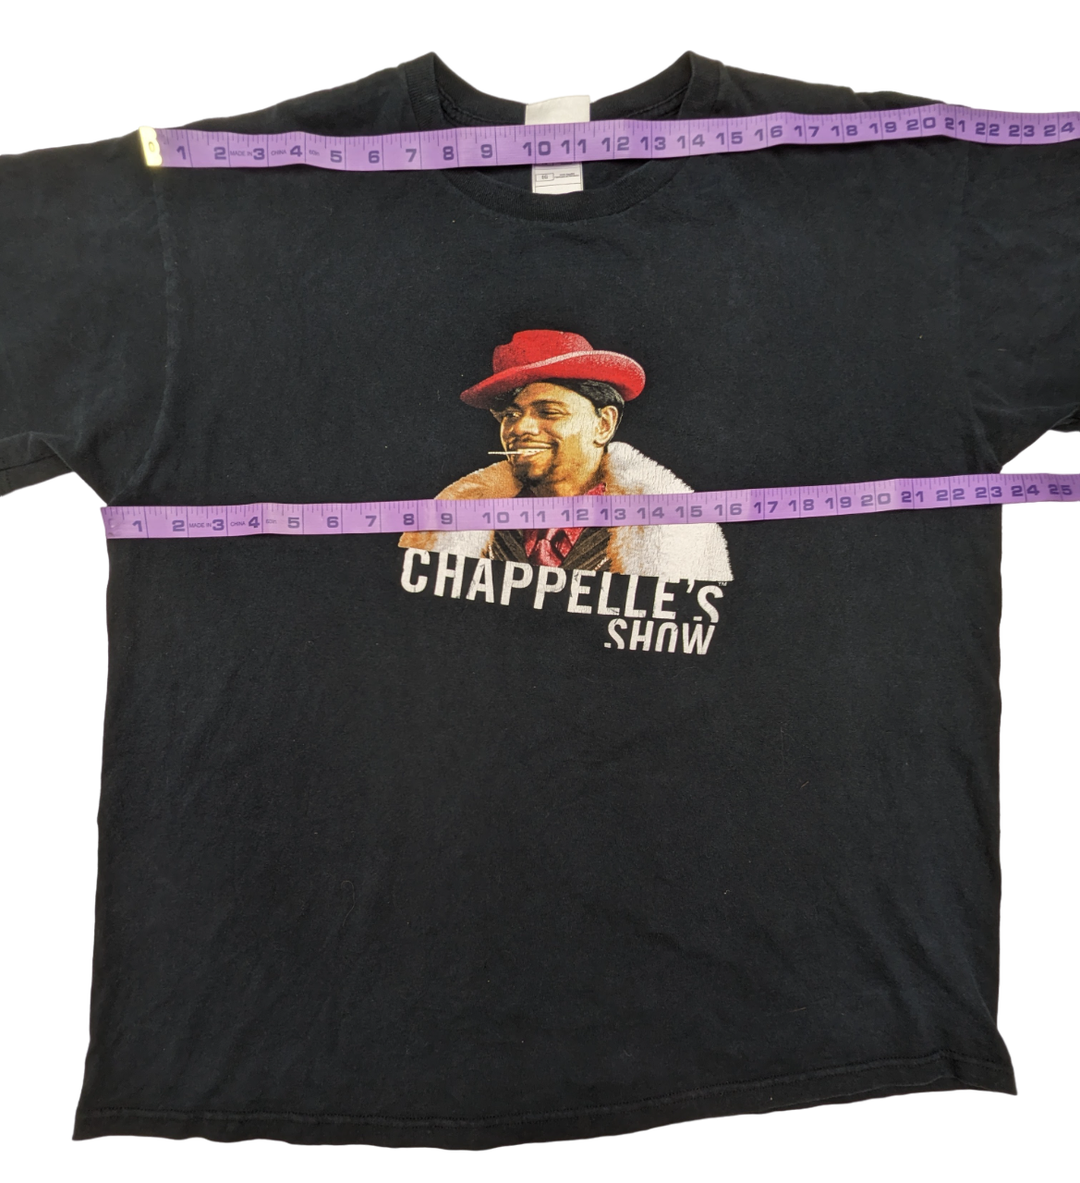 Dave Chappelle Comedy Central T-Shirt 1 pc 1 lb B0424214